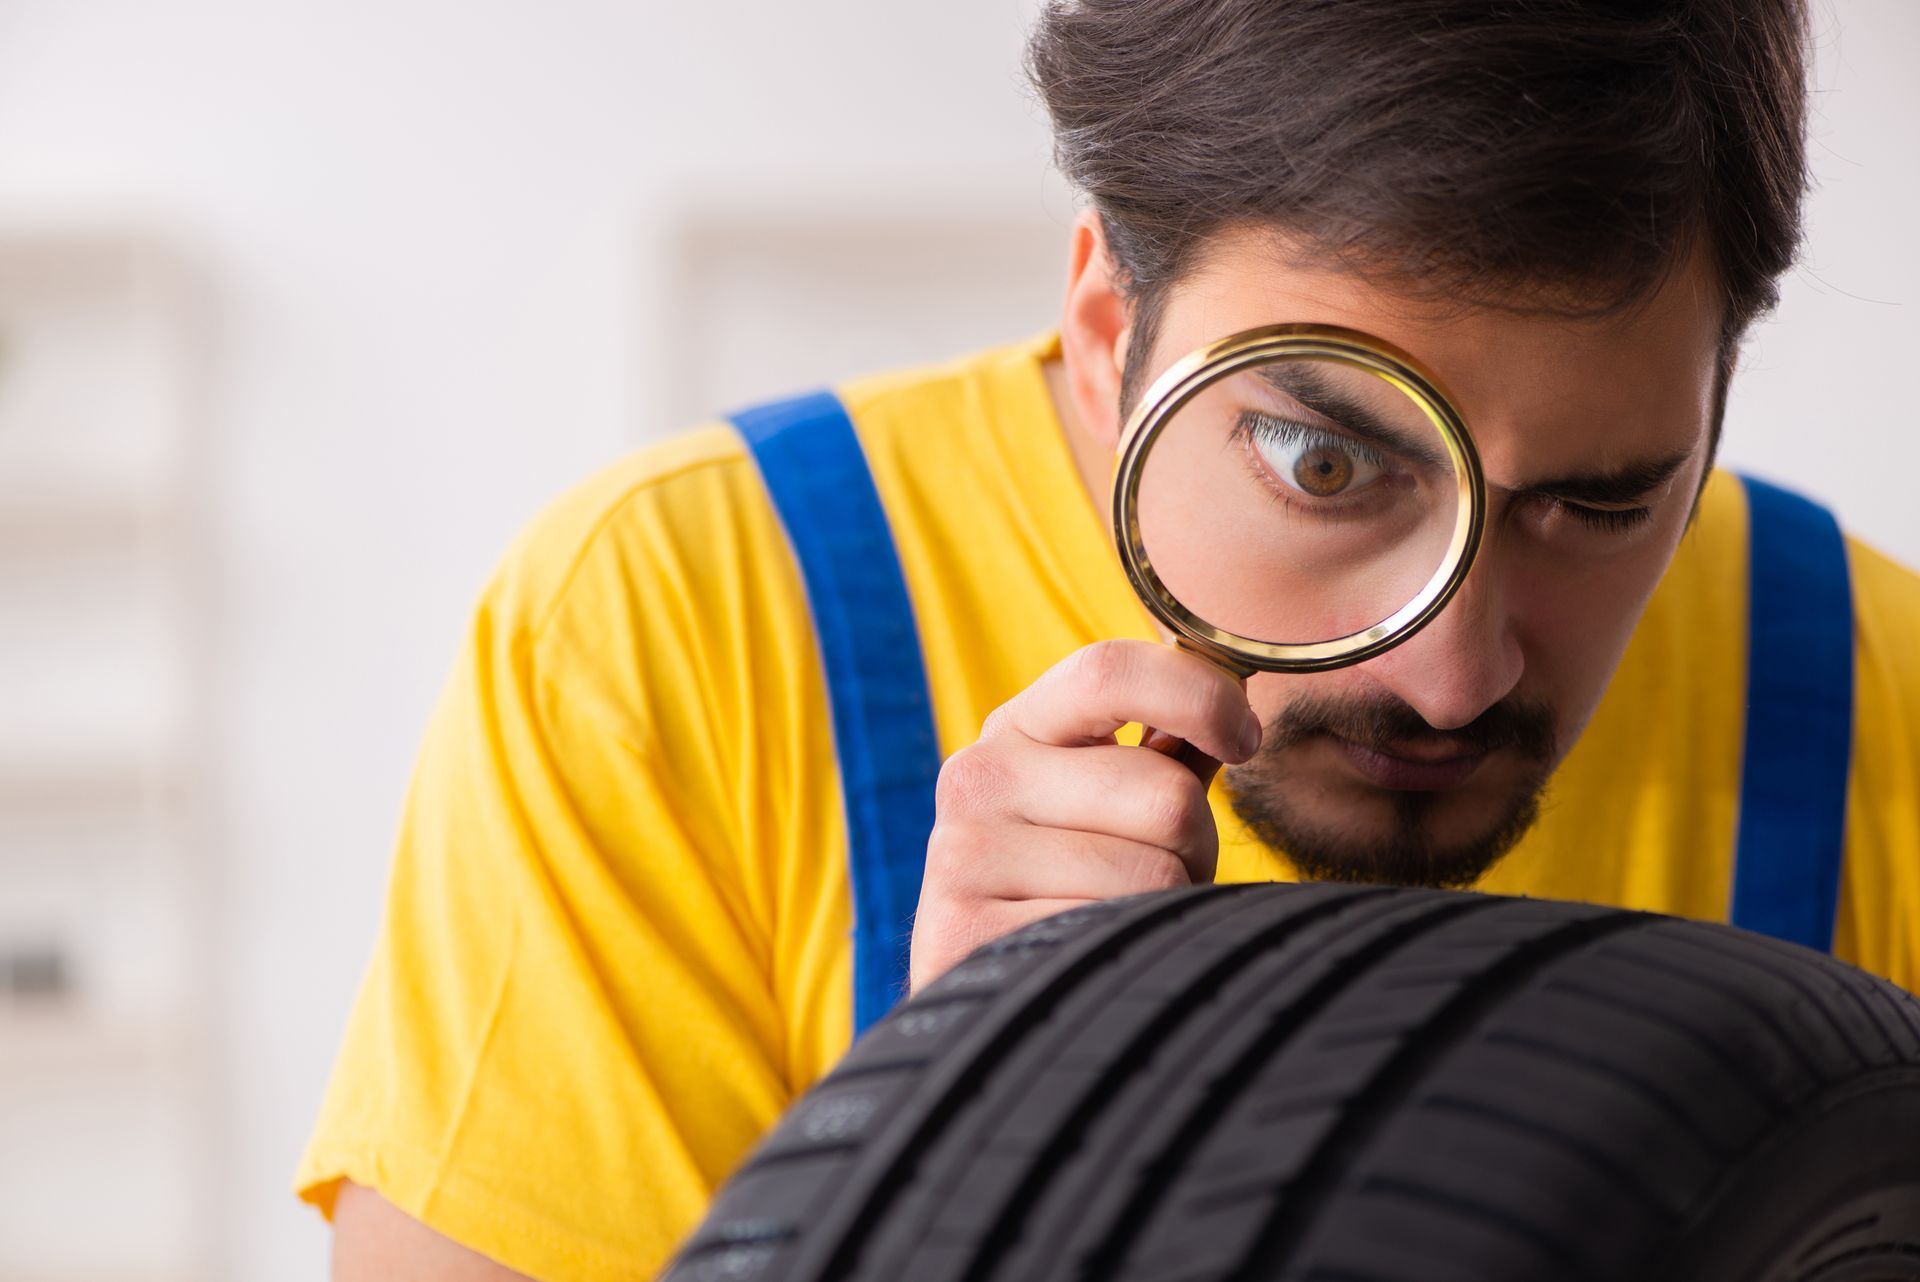 Man wearing yellow shirt and blue overalls is checking a car tyre with a magnifying glass.